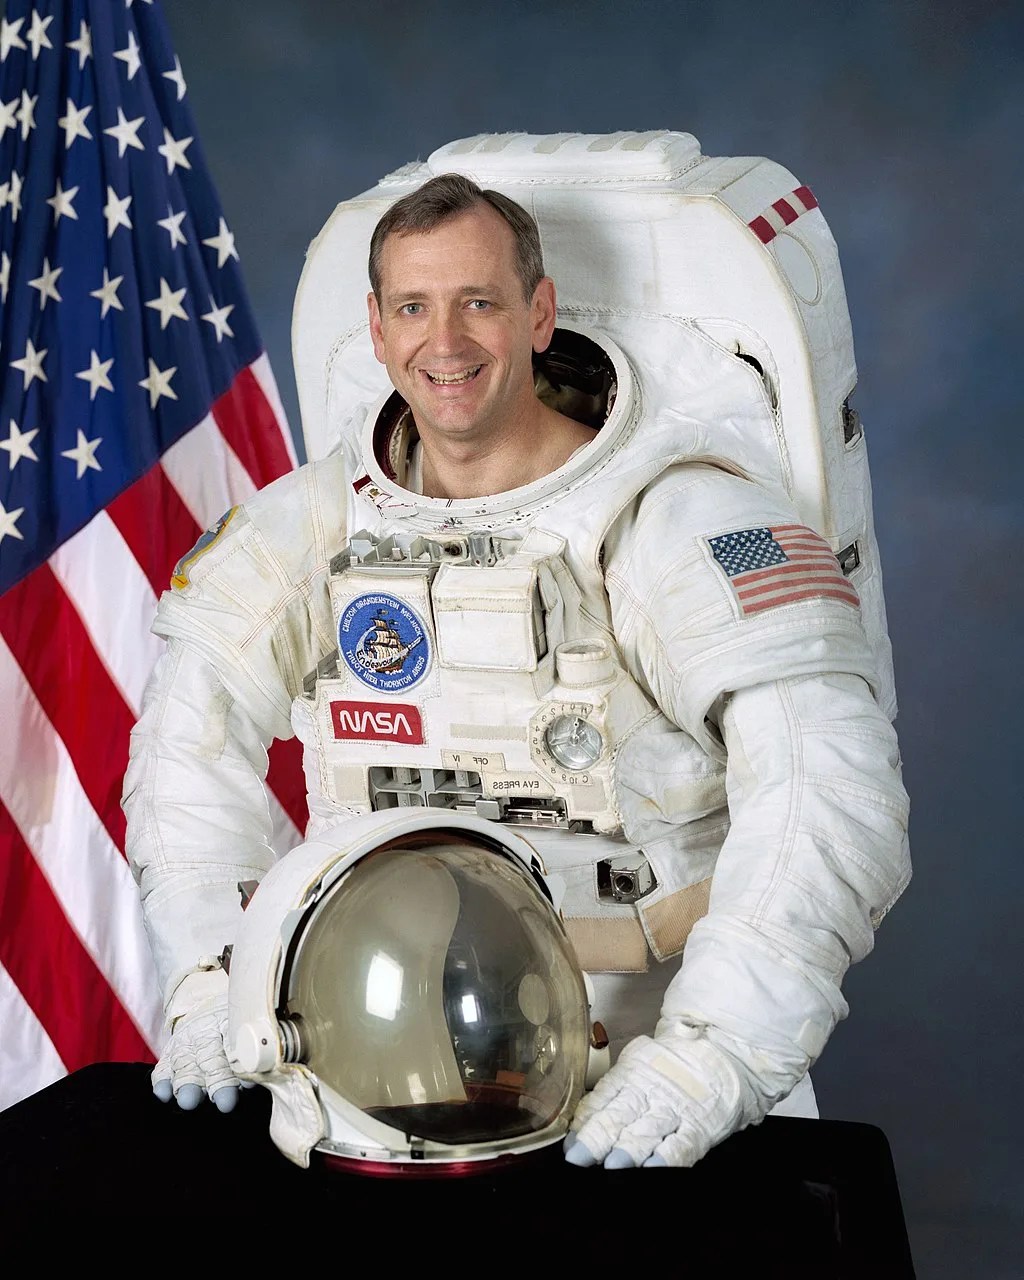 Photo of astronaut Thomas Akers in his spacesuit. American flag is behind him.